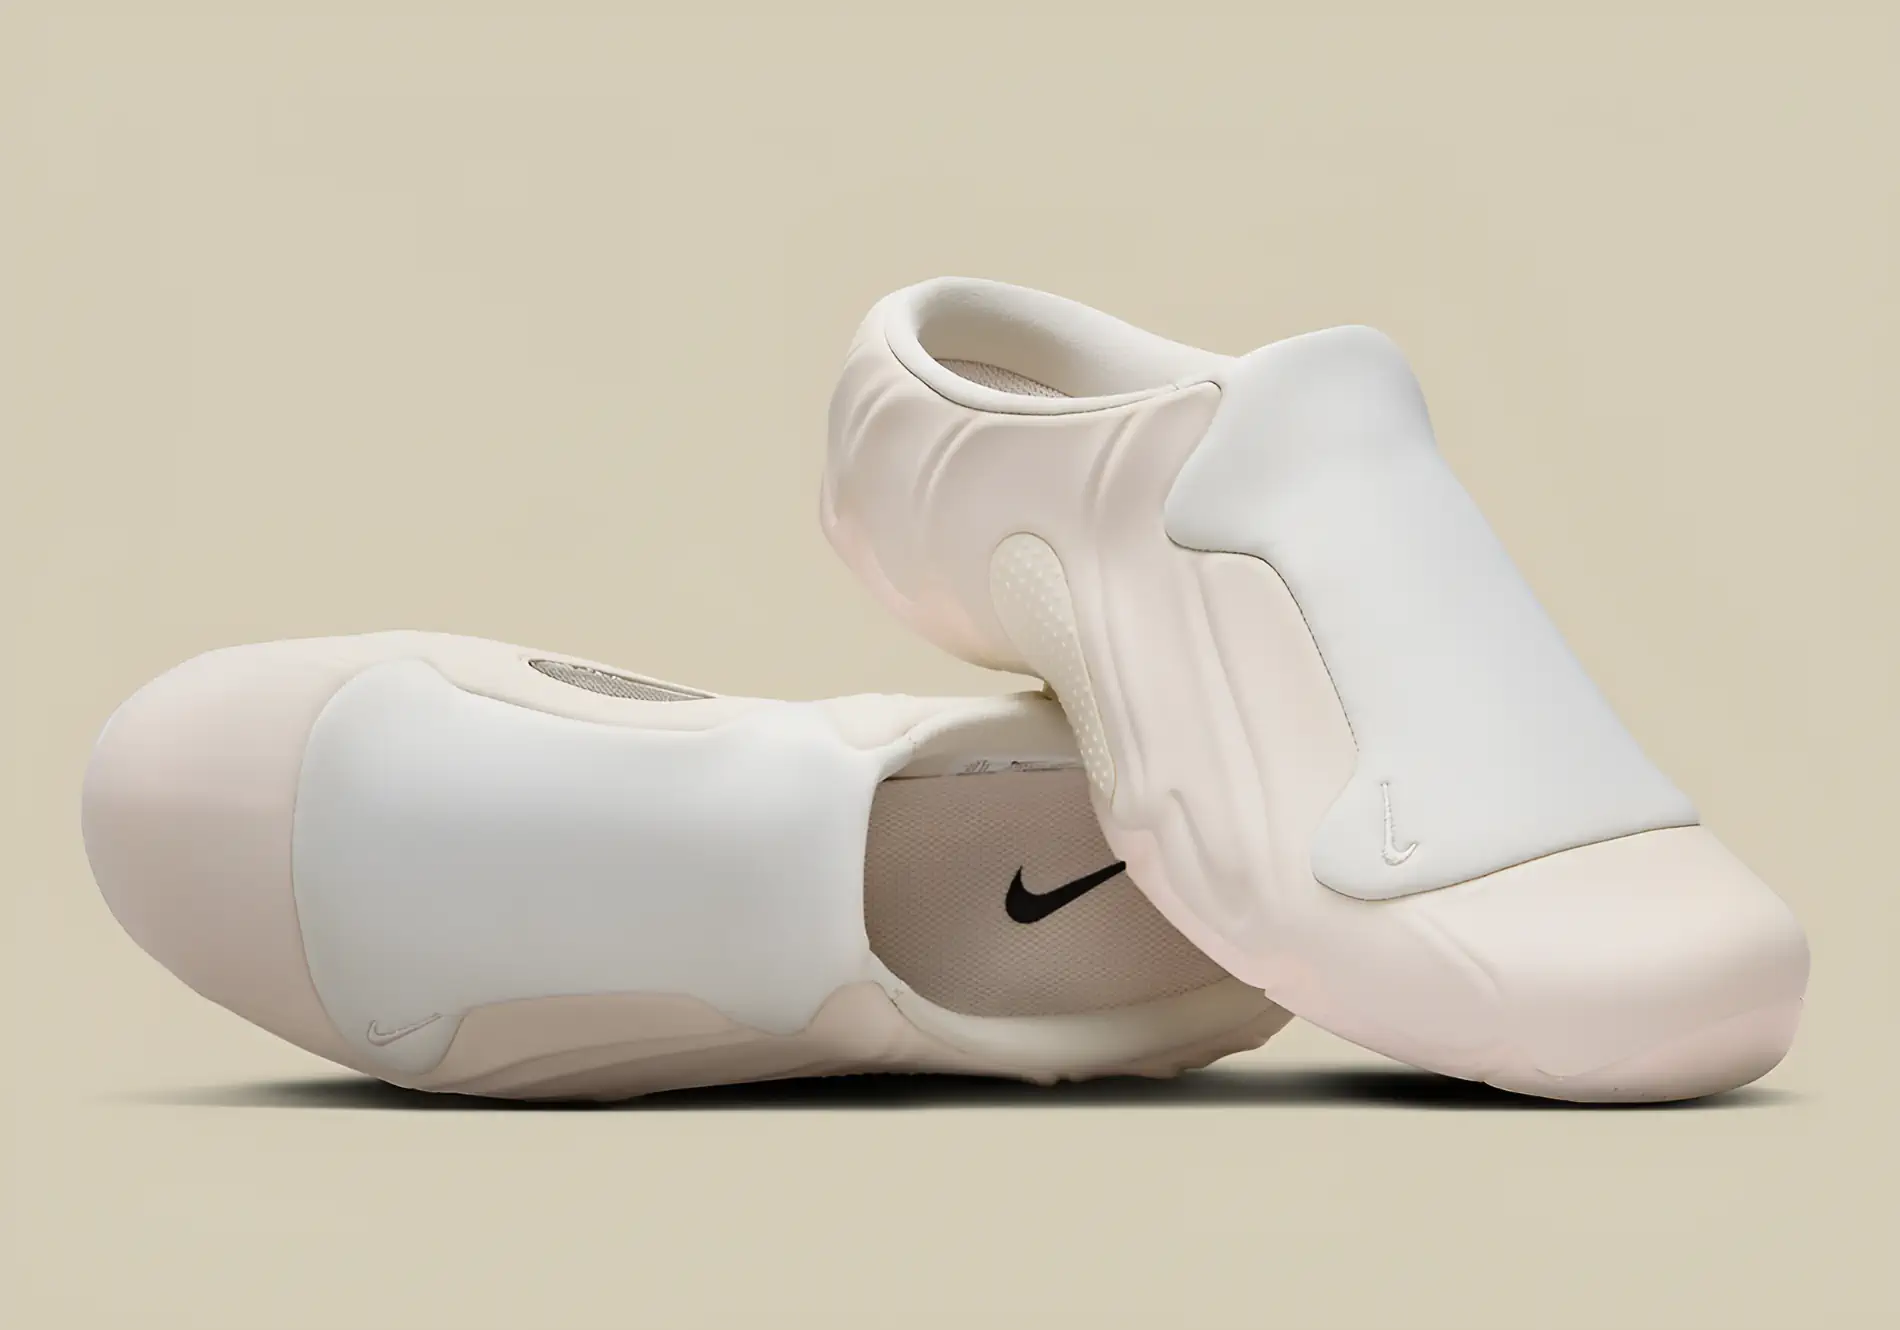 The Nike Clogposite "Light Orewood Brown" is a unique sneaker-clog hybrid that offers a blend of comfort, style and functionality. Its innovative design and versatile colorway make it a perfect summer shoe choice.